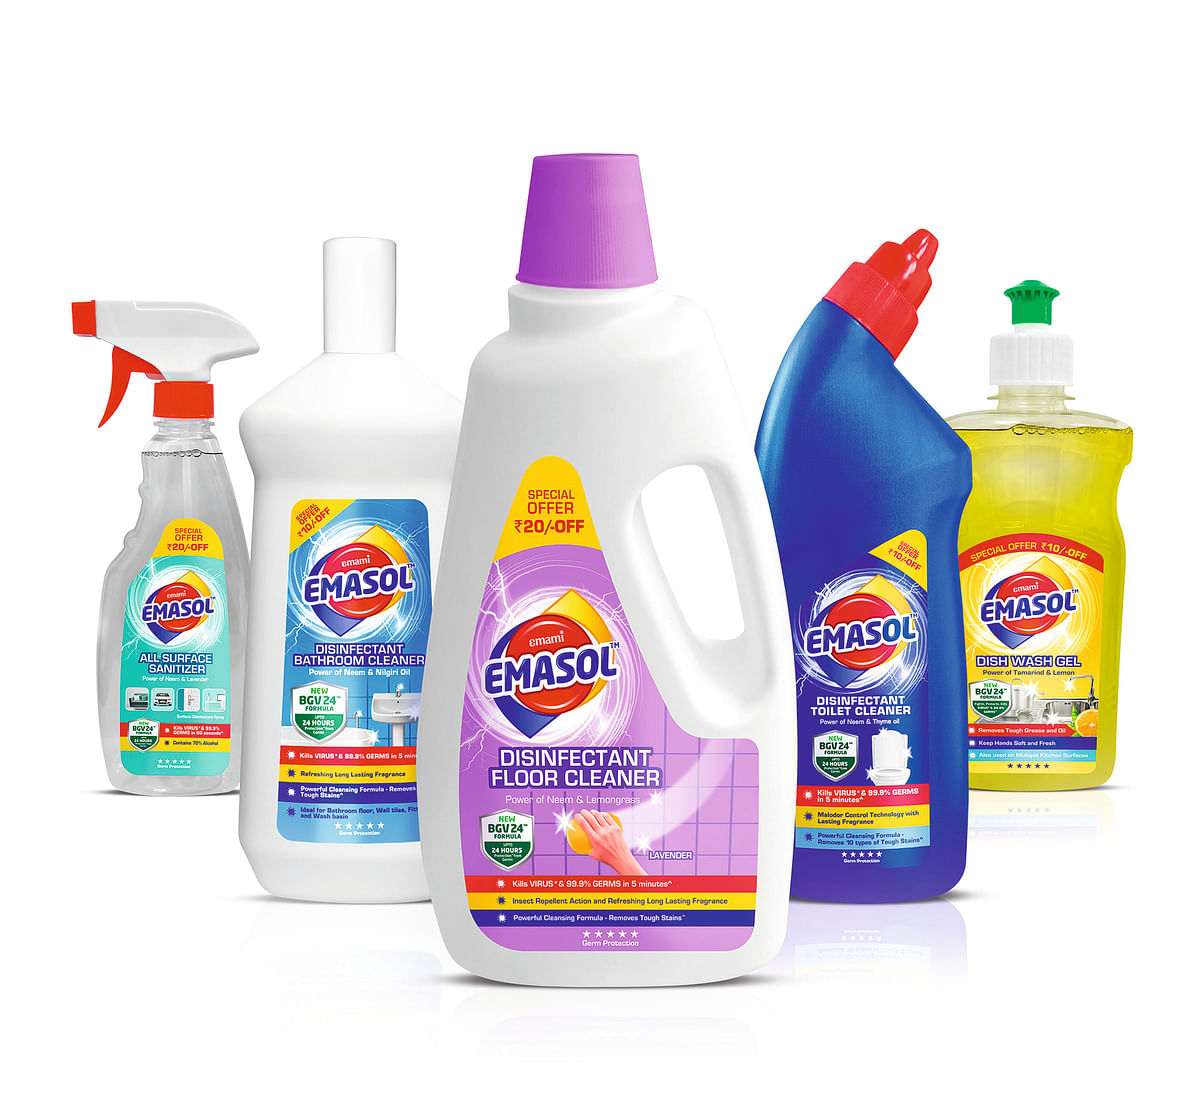 EMASOL's range of home hygiene products